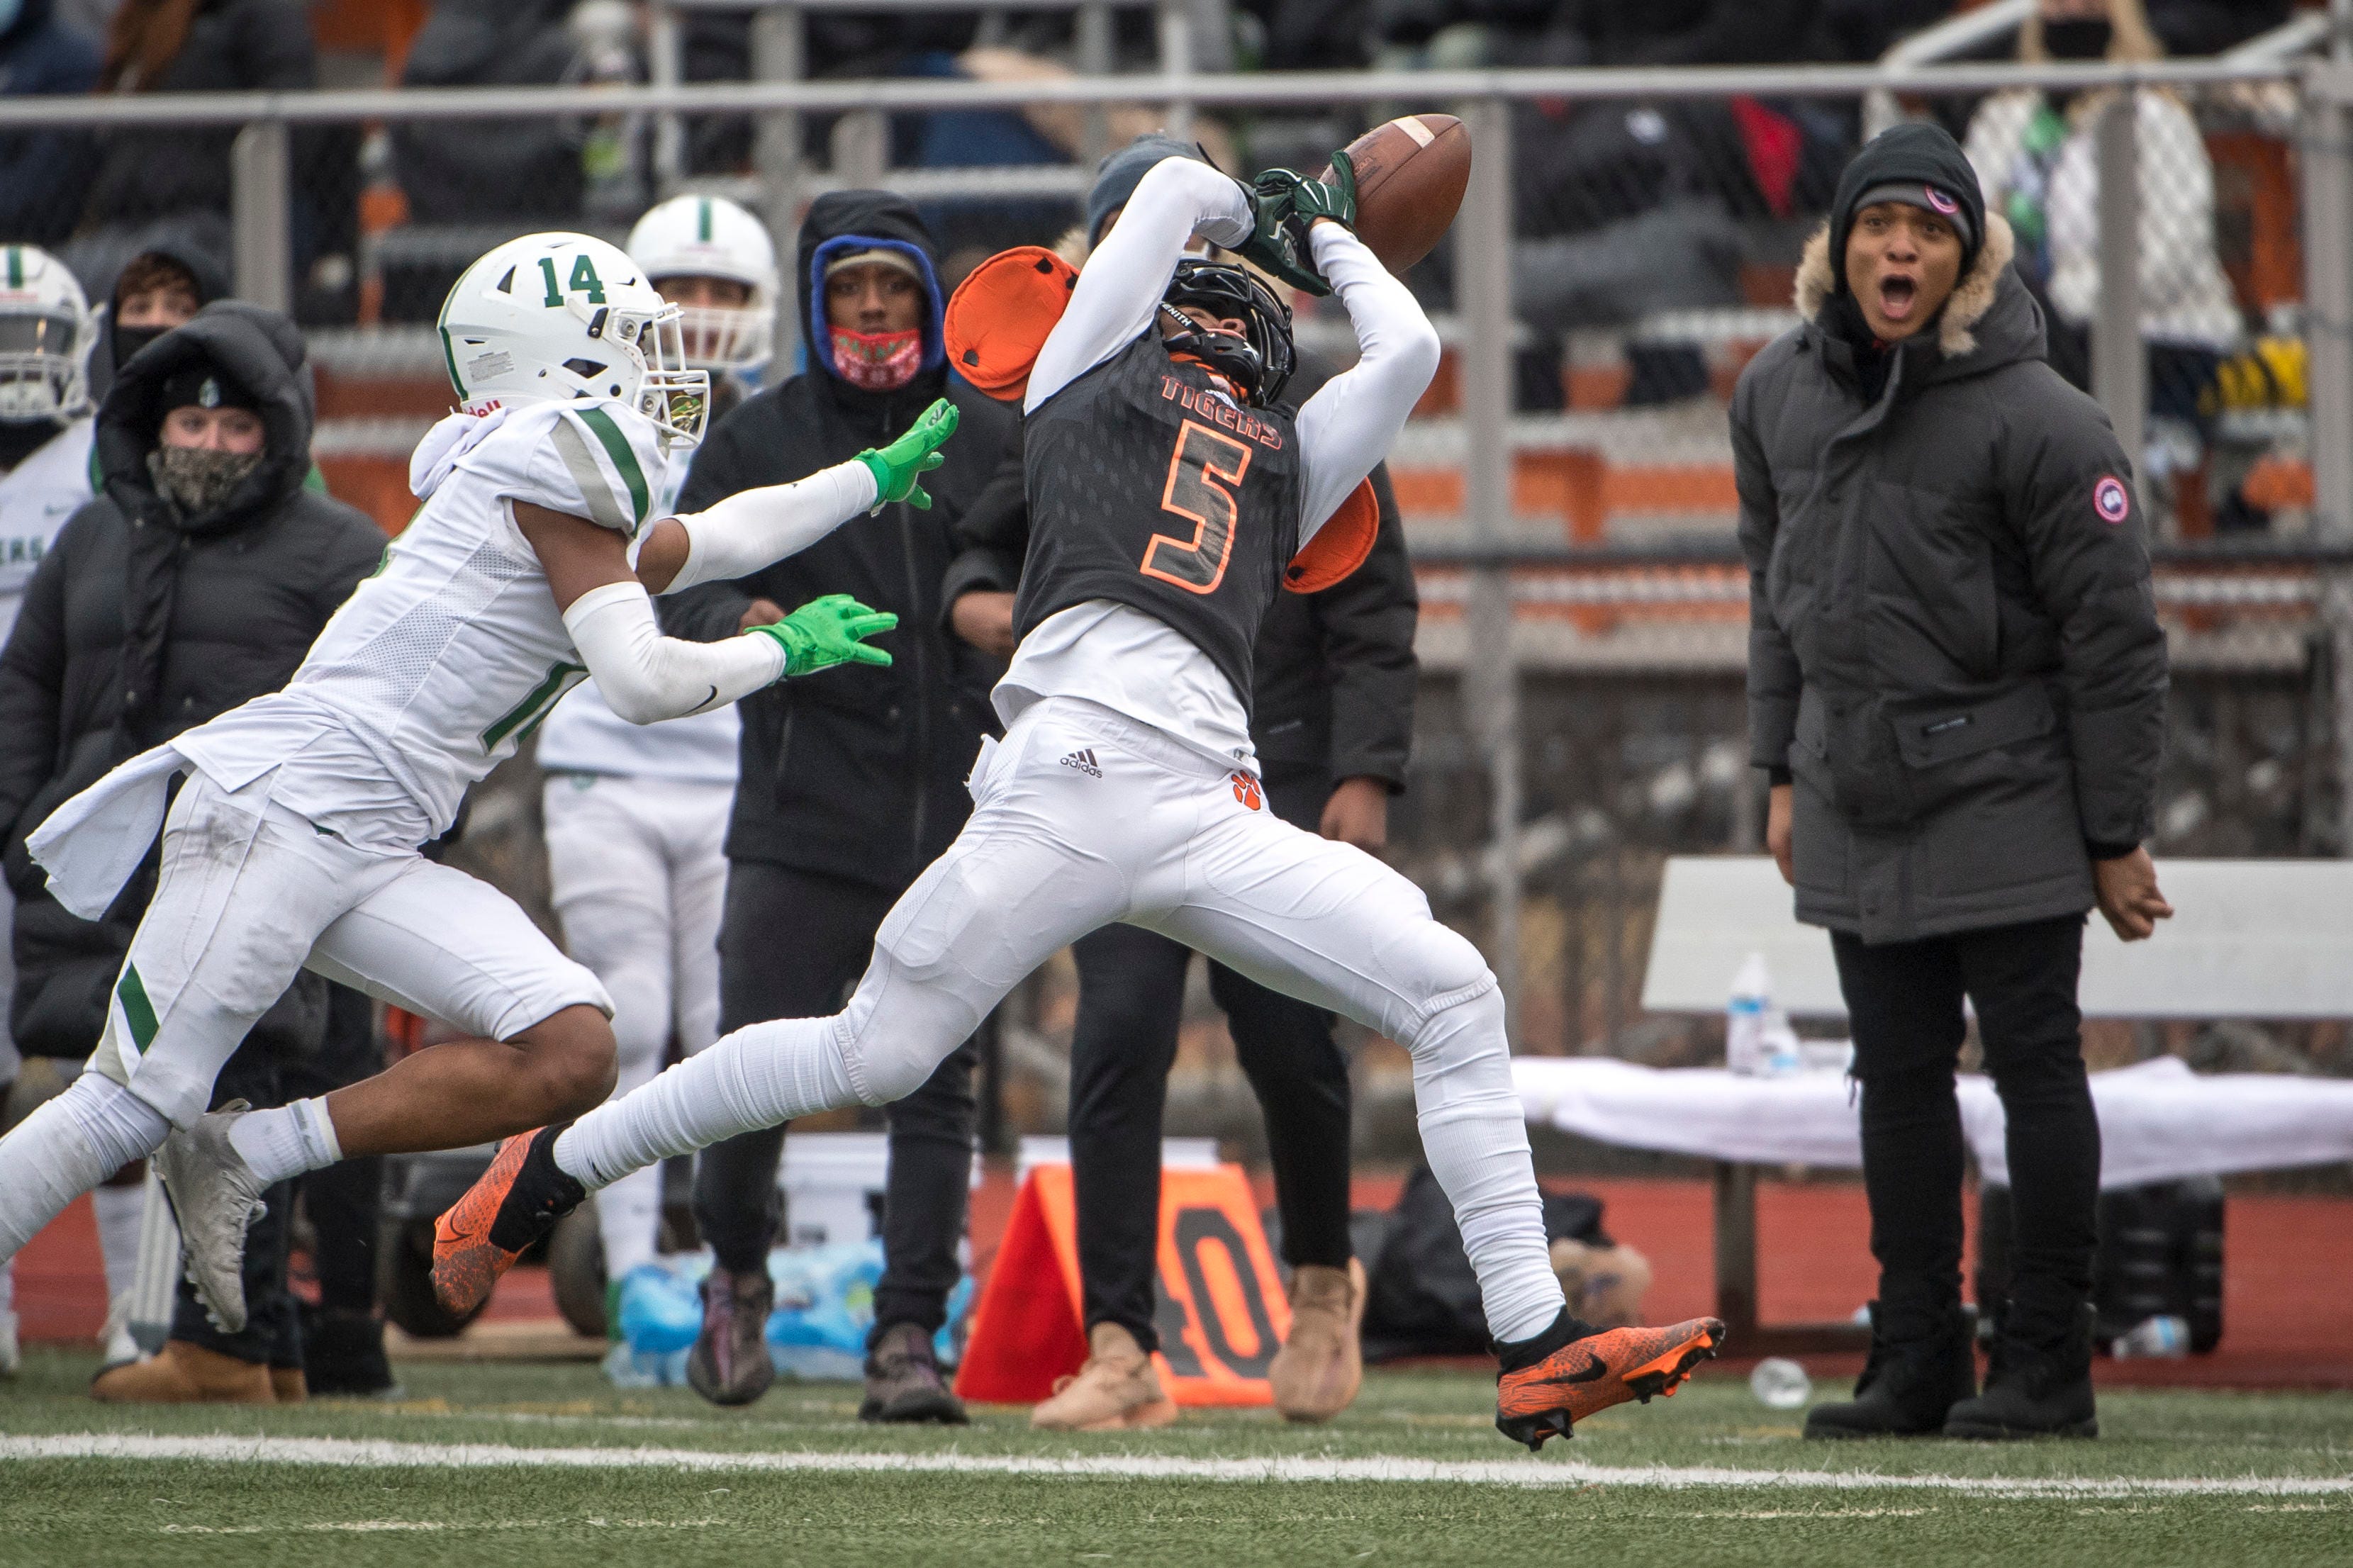 Belleville junior wide receiver Tyree Lockett (5) can't pull in this pass while being covered by West Bloomfield senior Grant Lenton (14) during the third quarter.